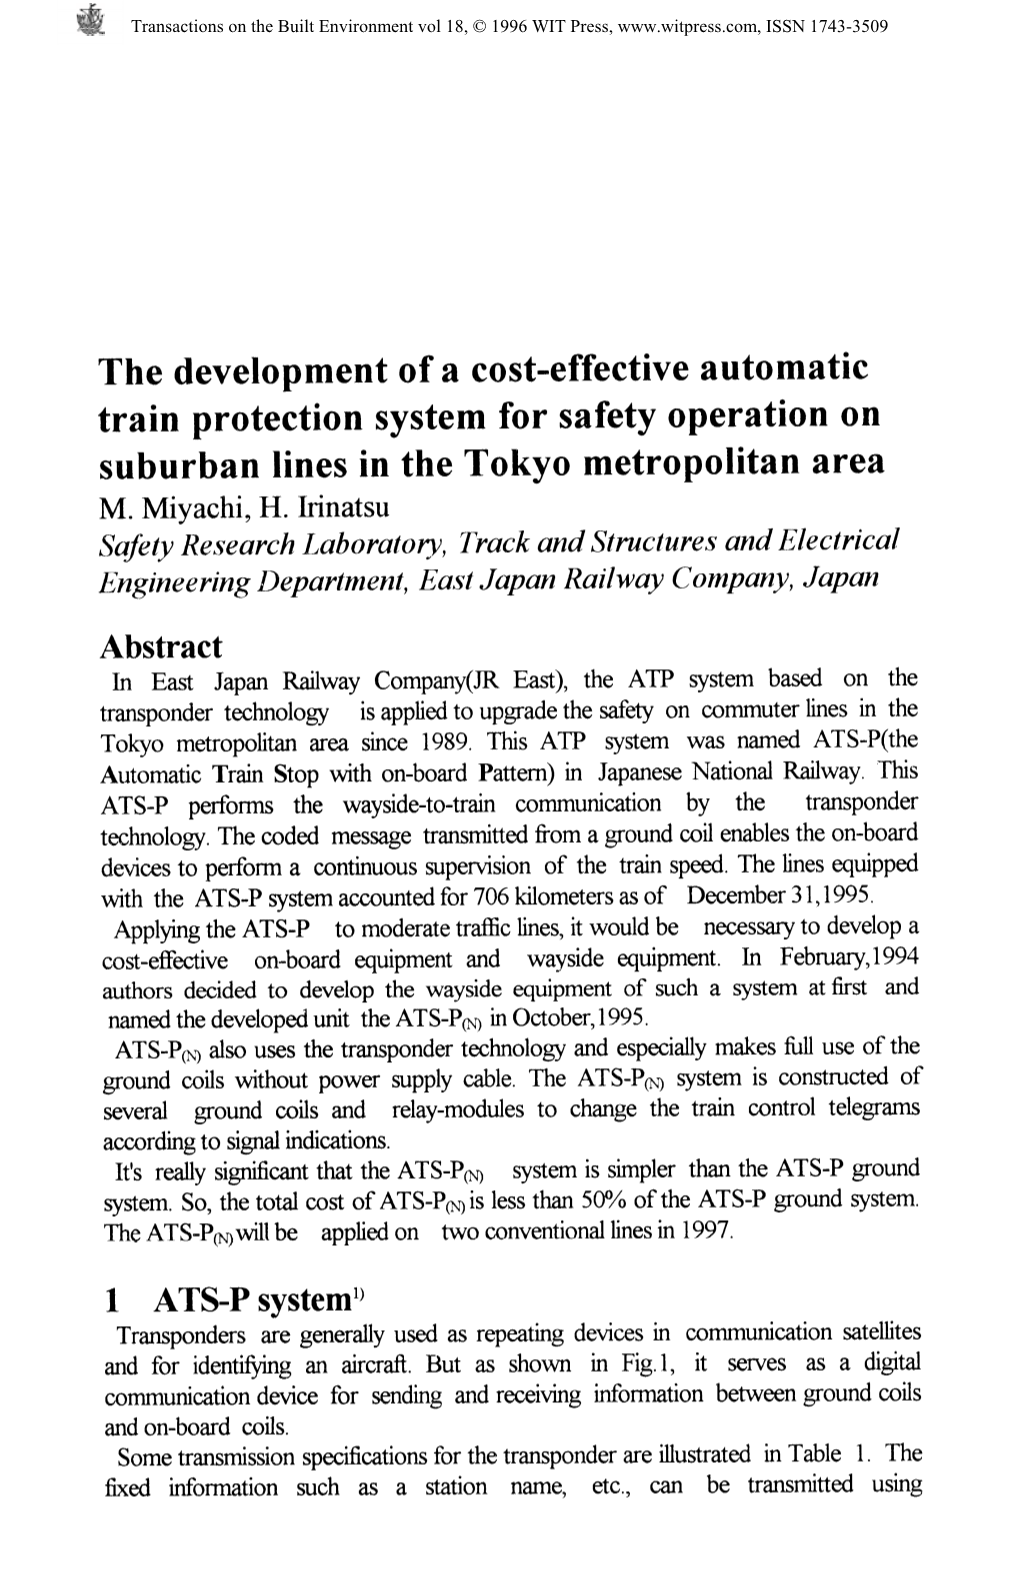 The Development of a Cost-Effective Automatic Train Protection System for Safety Operation on Suburban Lines in the Tokyo Metrop